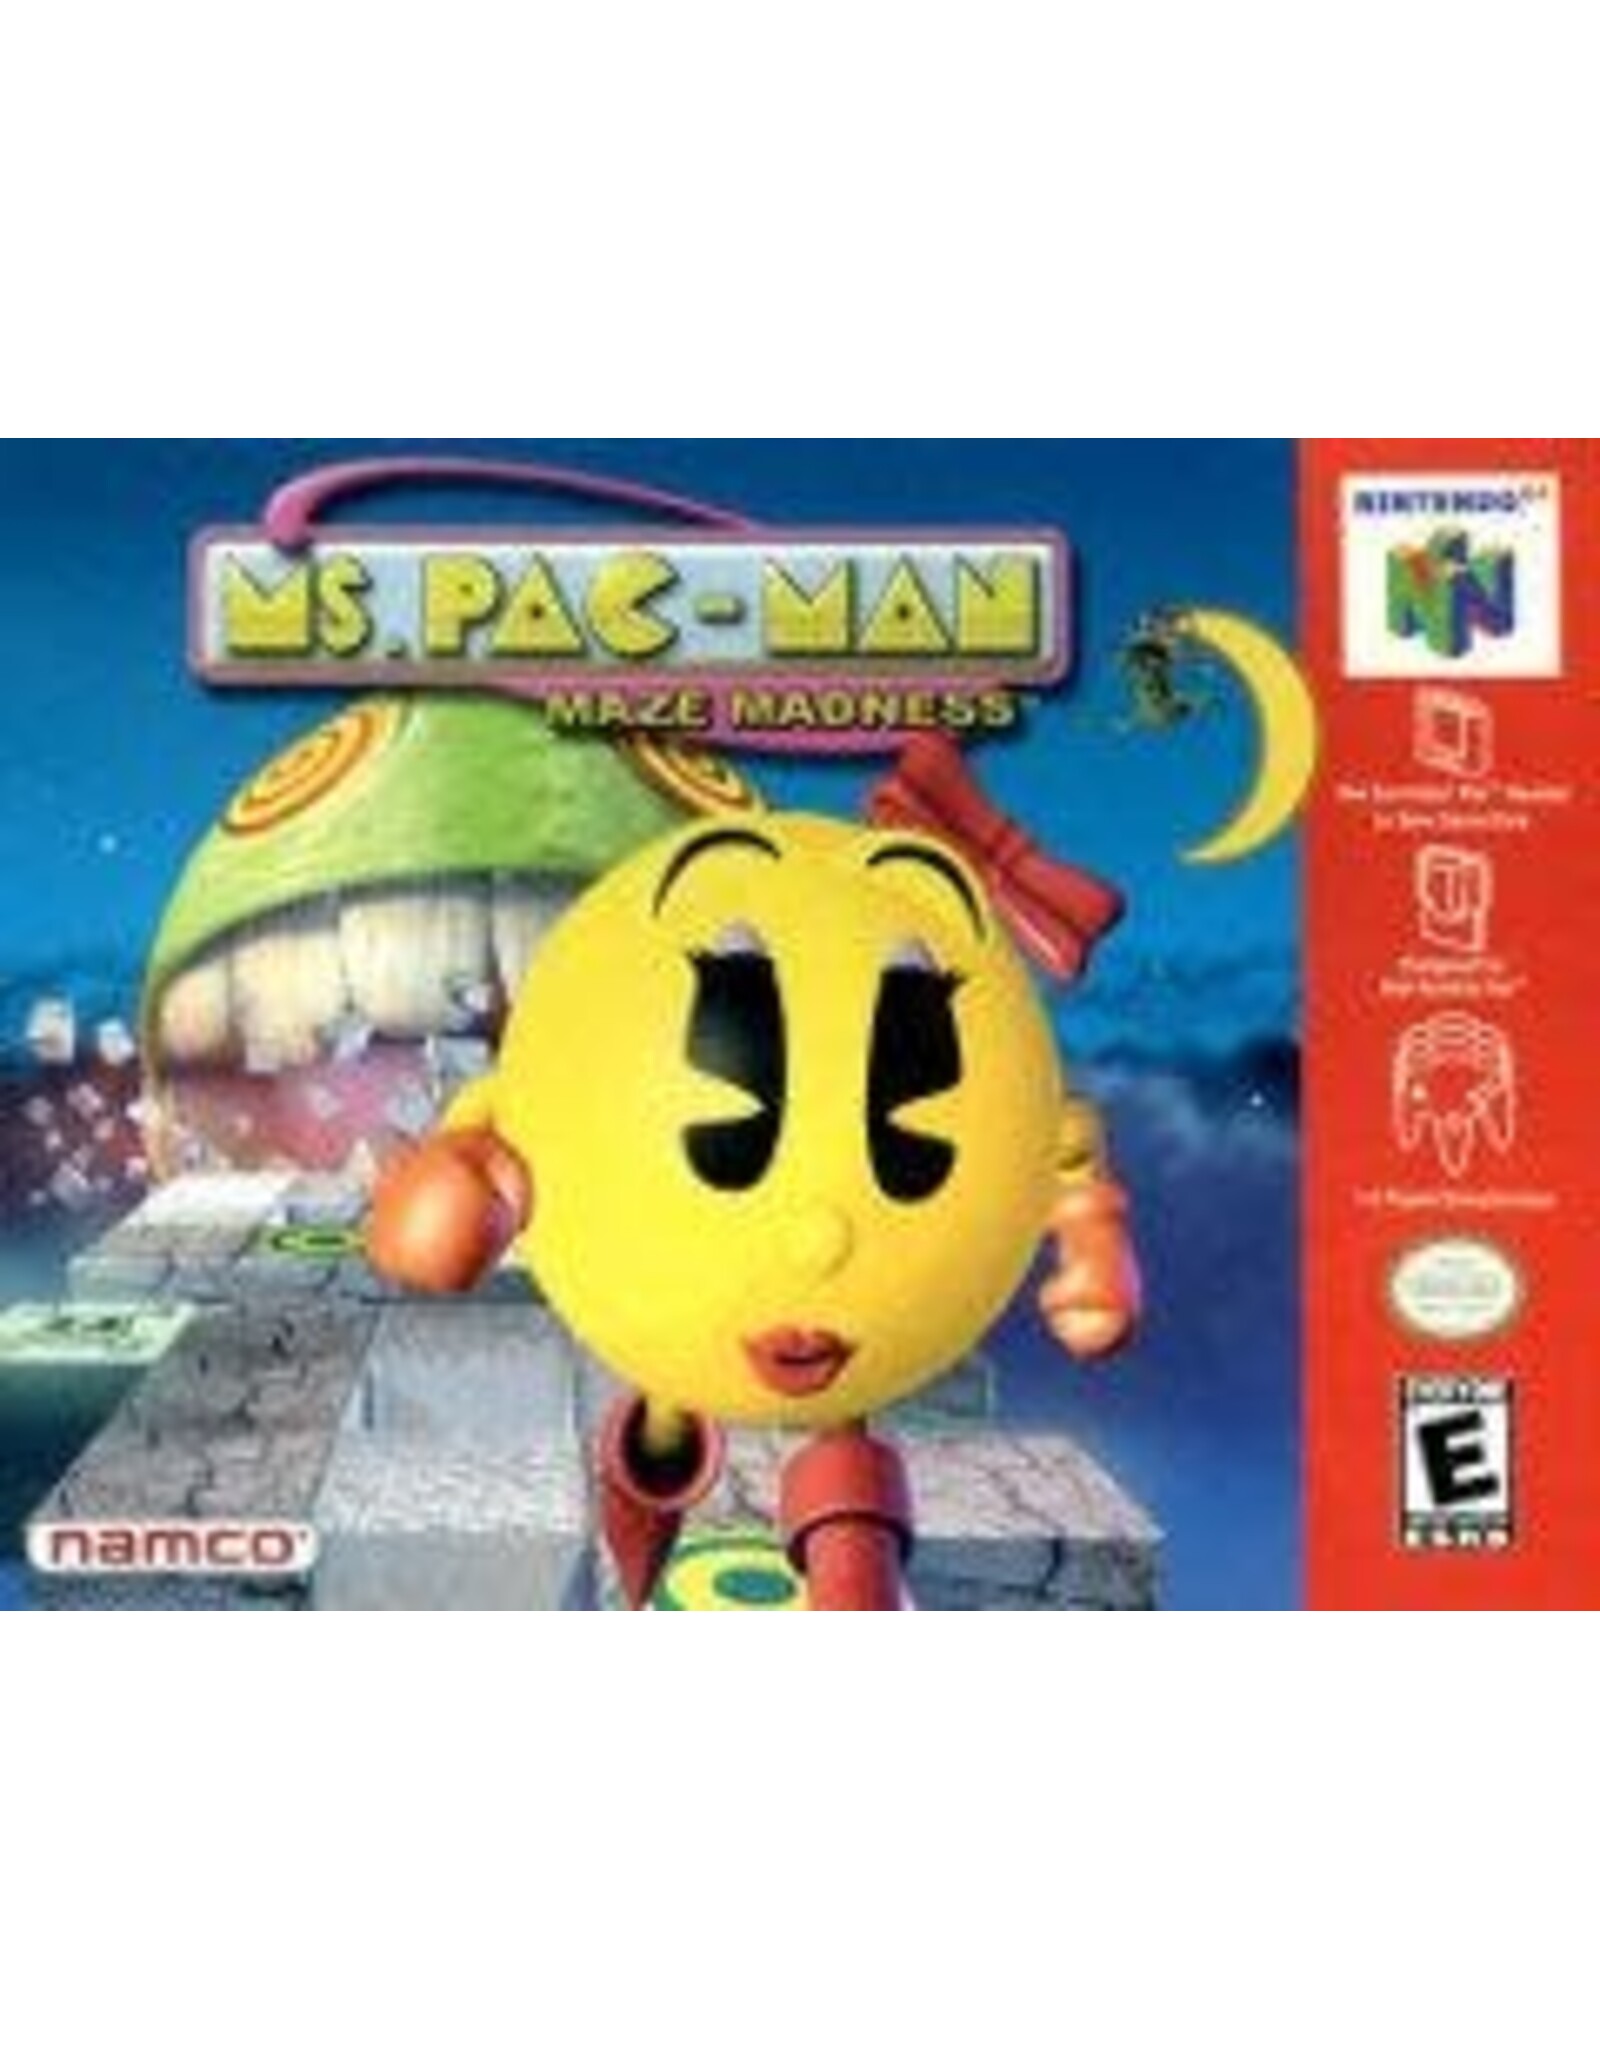 Nintendo 64 Ms. Pac-Man Maze Madness (Used, Cart Only)